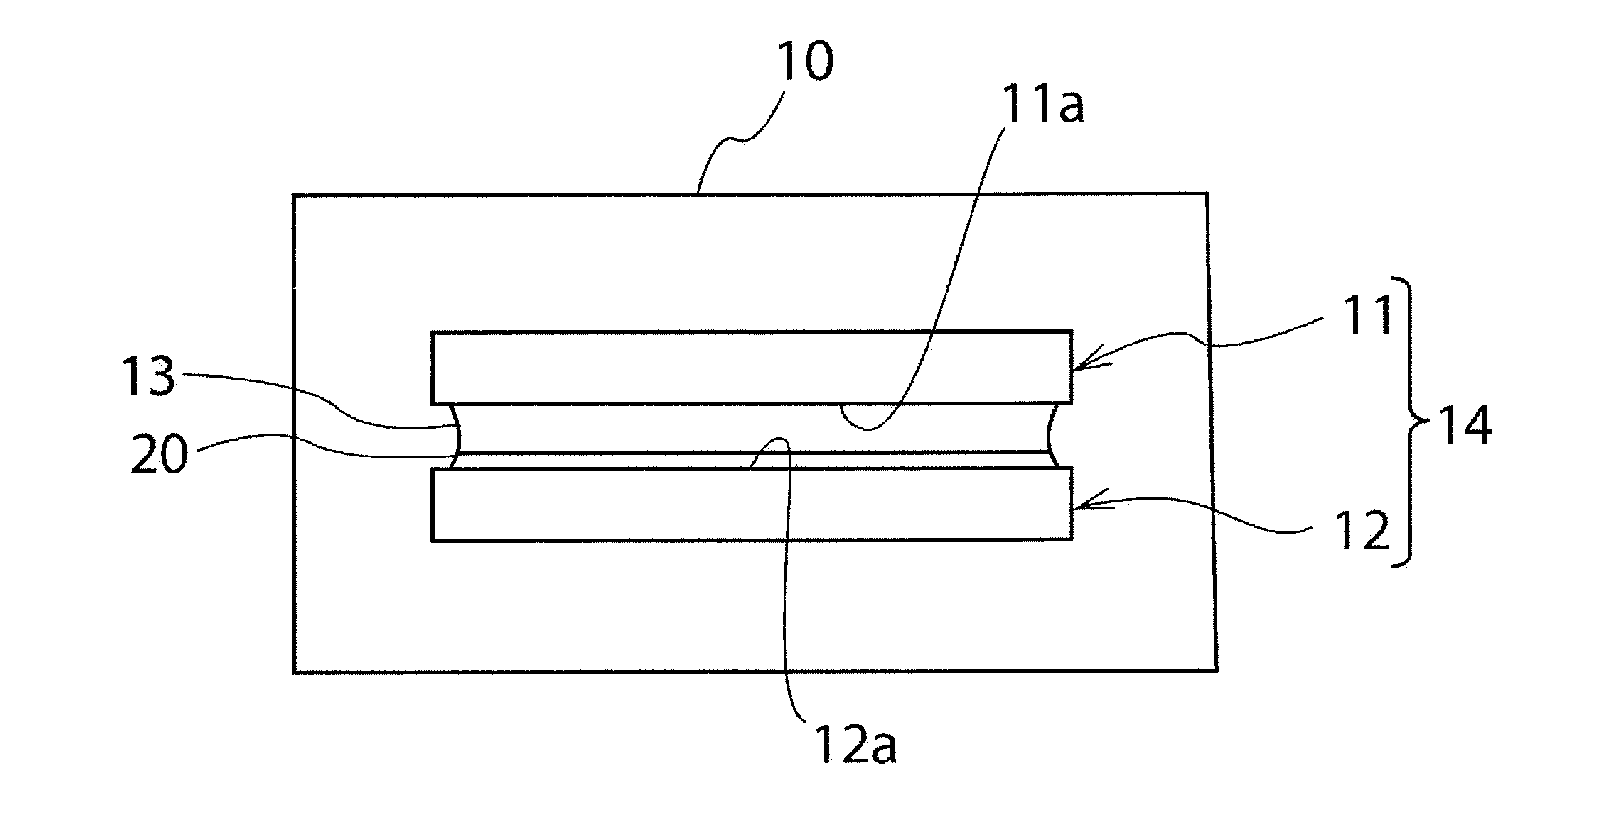 Unit for liquid phase epitaxial growth of monocrystalline silicon carbide, and method for liquid phase epitaxial growth of monocrystalline silicon carbide